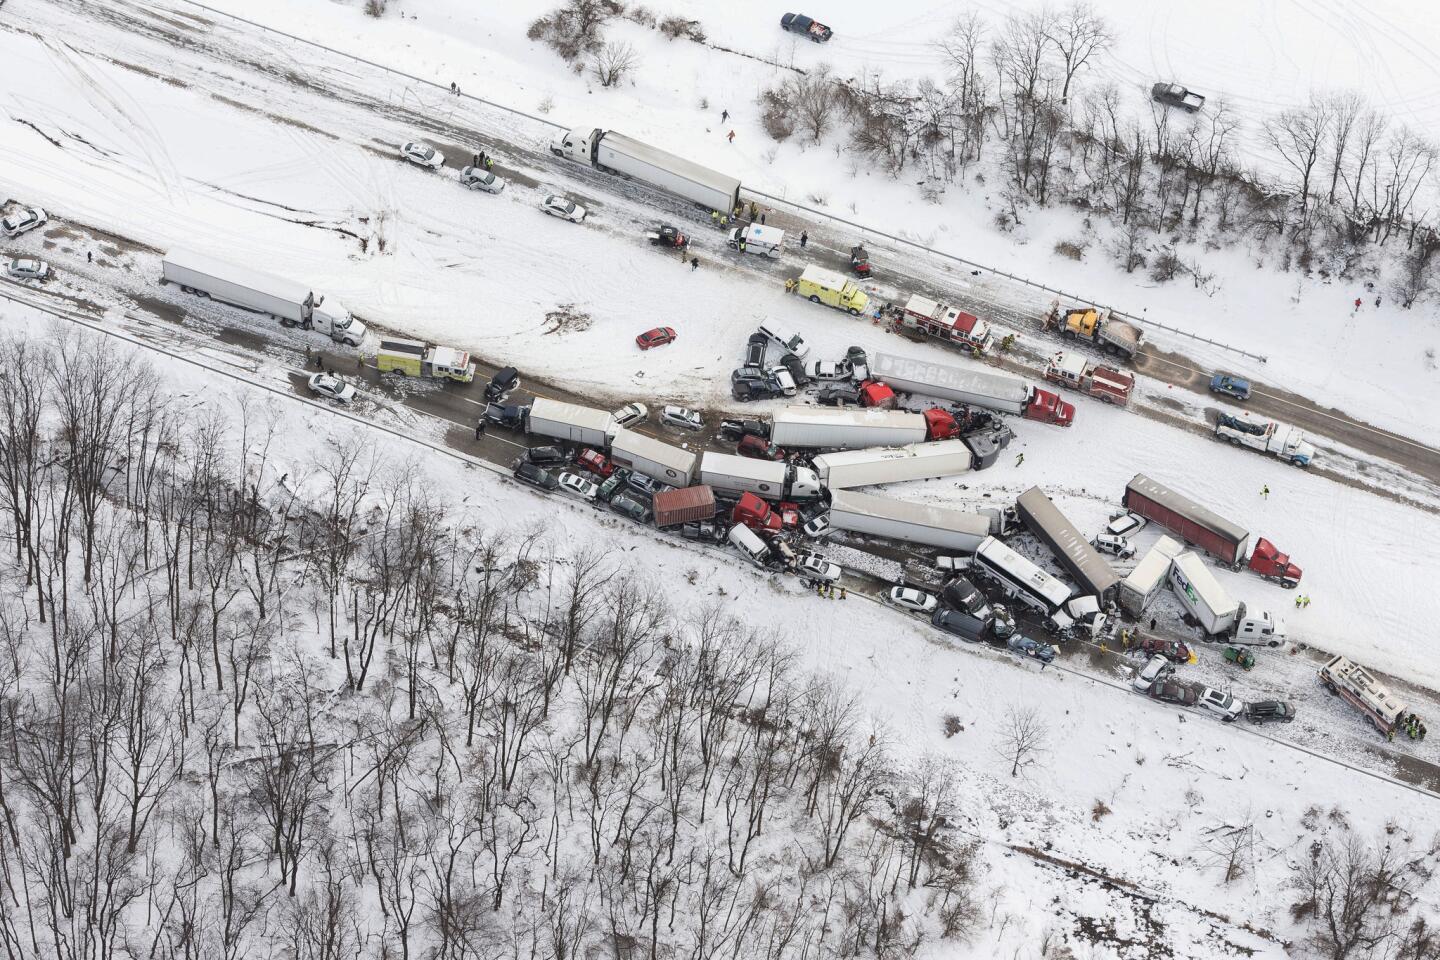 Vehicles pile up at the site of a fatal crash near Fredericksburg, Pa., on Feb. 13, 2016.